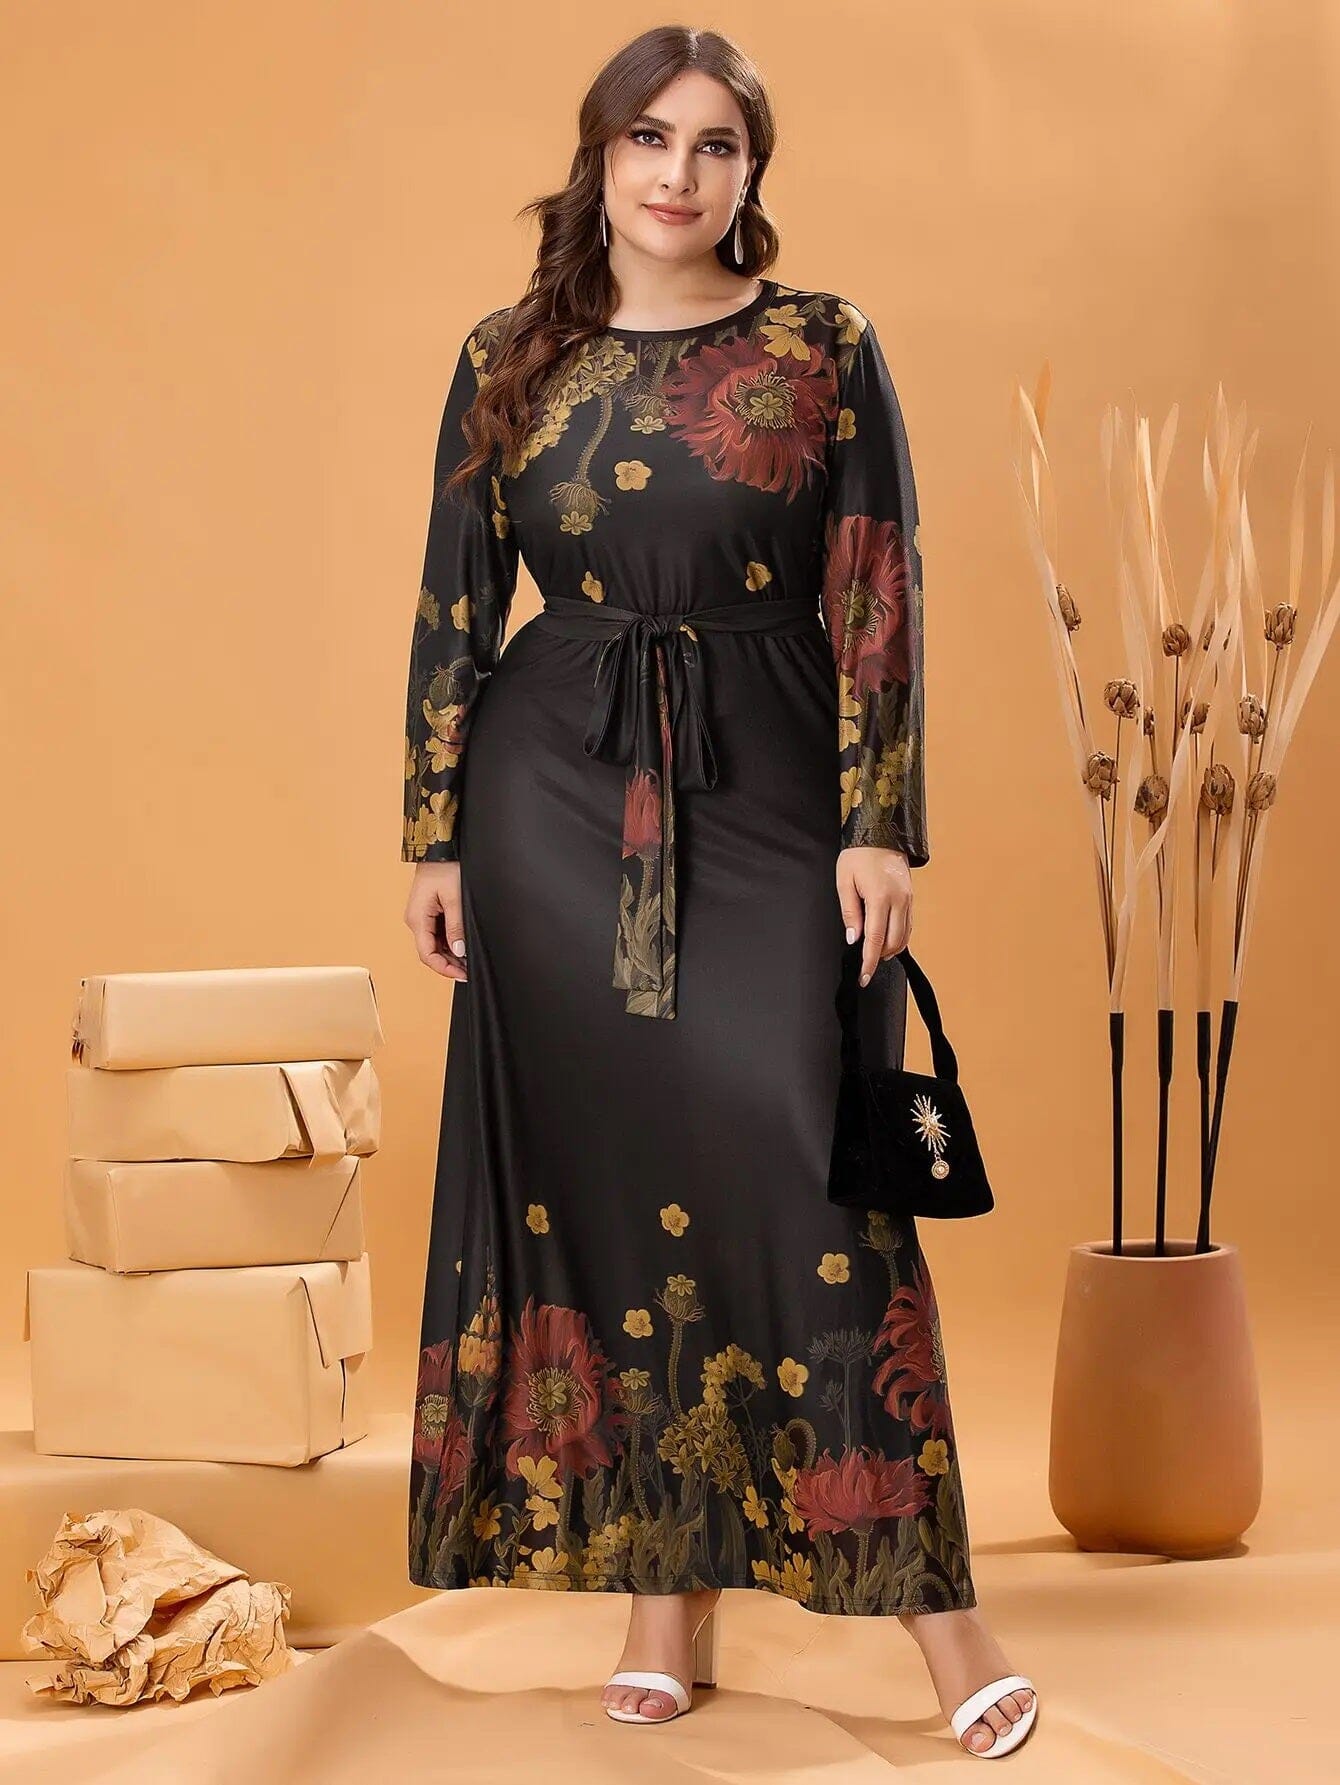 Women Plus Size Long Sleeve Floral Printed Casual Round Neck Long Maxi Dress Dresses jehouze 